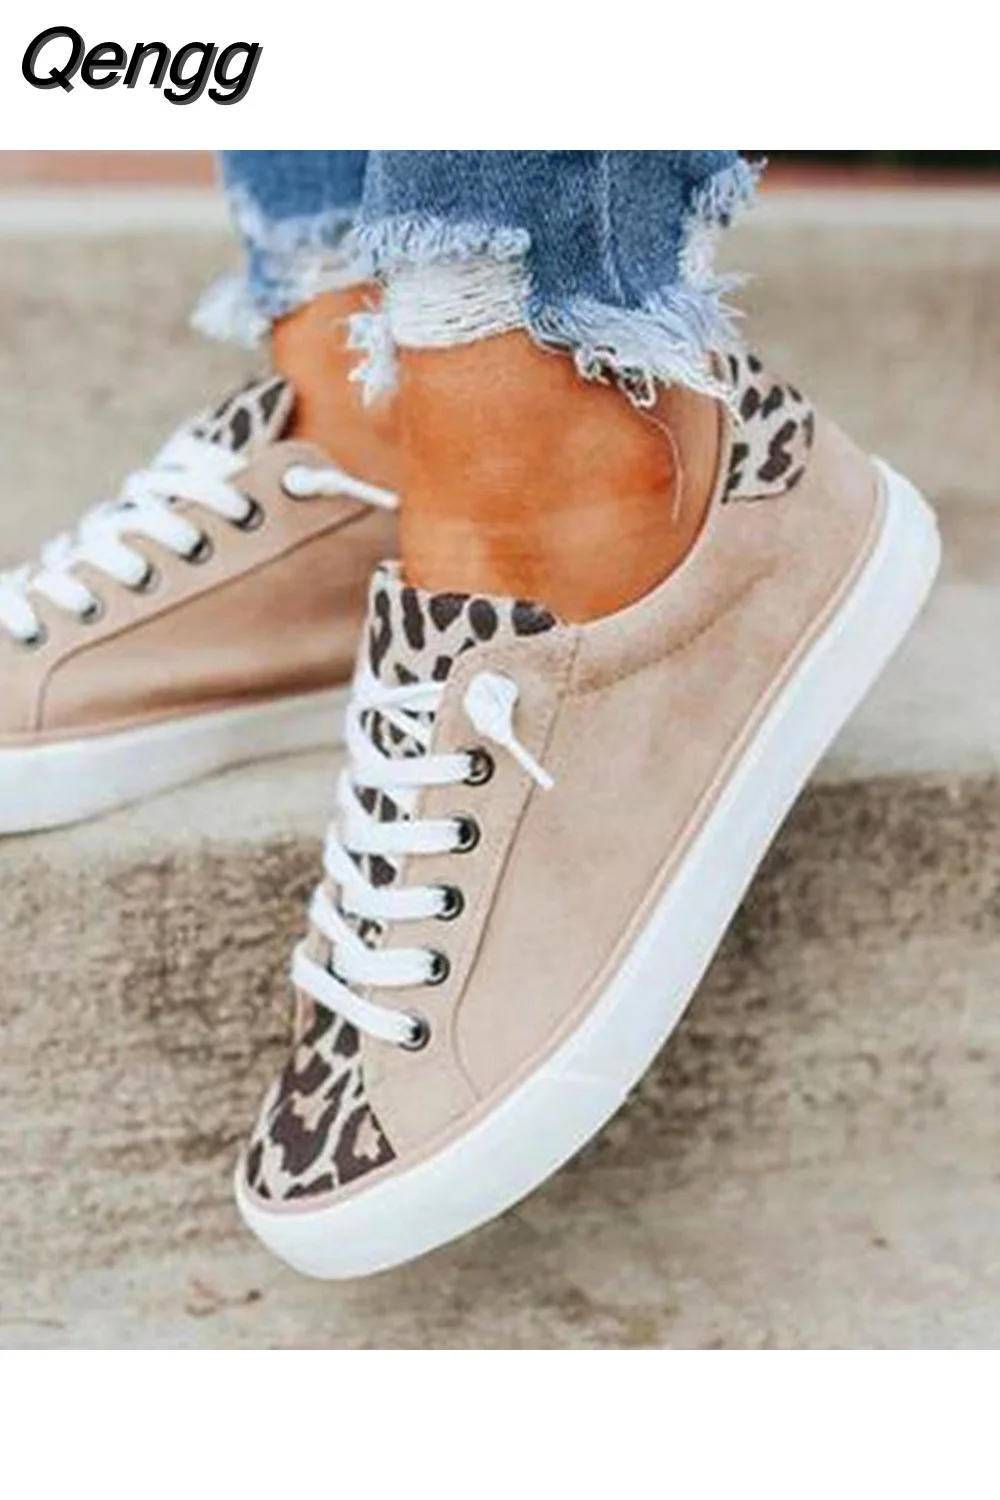 Qengg Spring Canvas Shoes New Light Slip on Flat Ladies Casual Shoes Woman Loafers White Sneakers Leopard Flats Plus Size 405-1